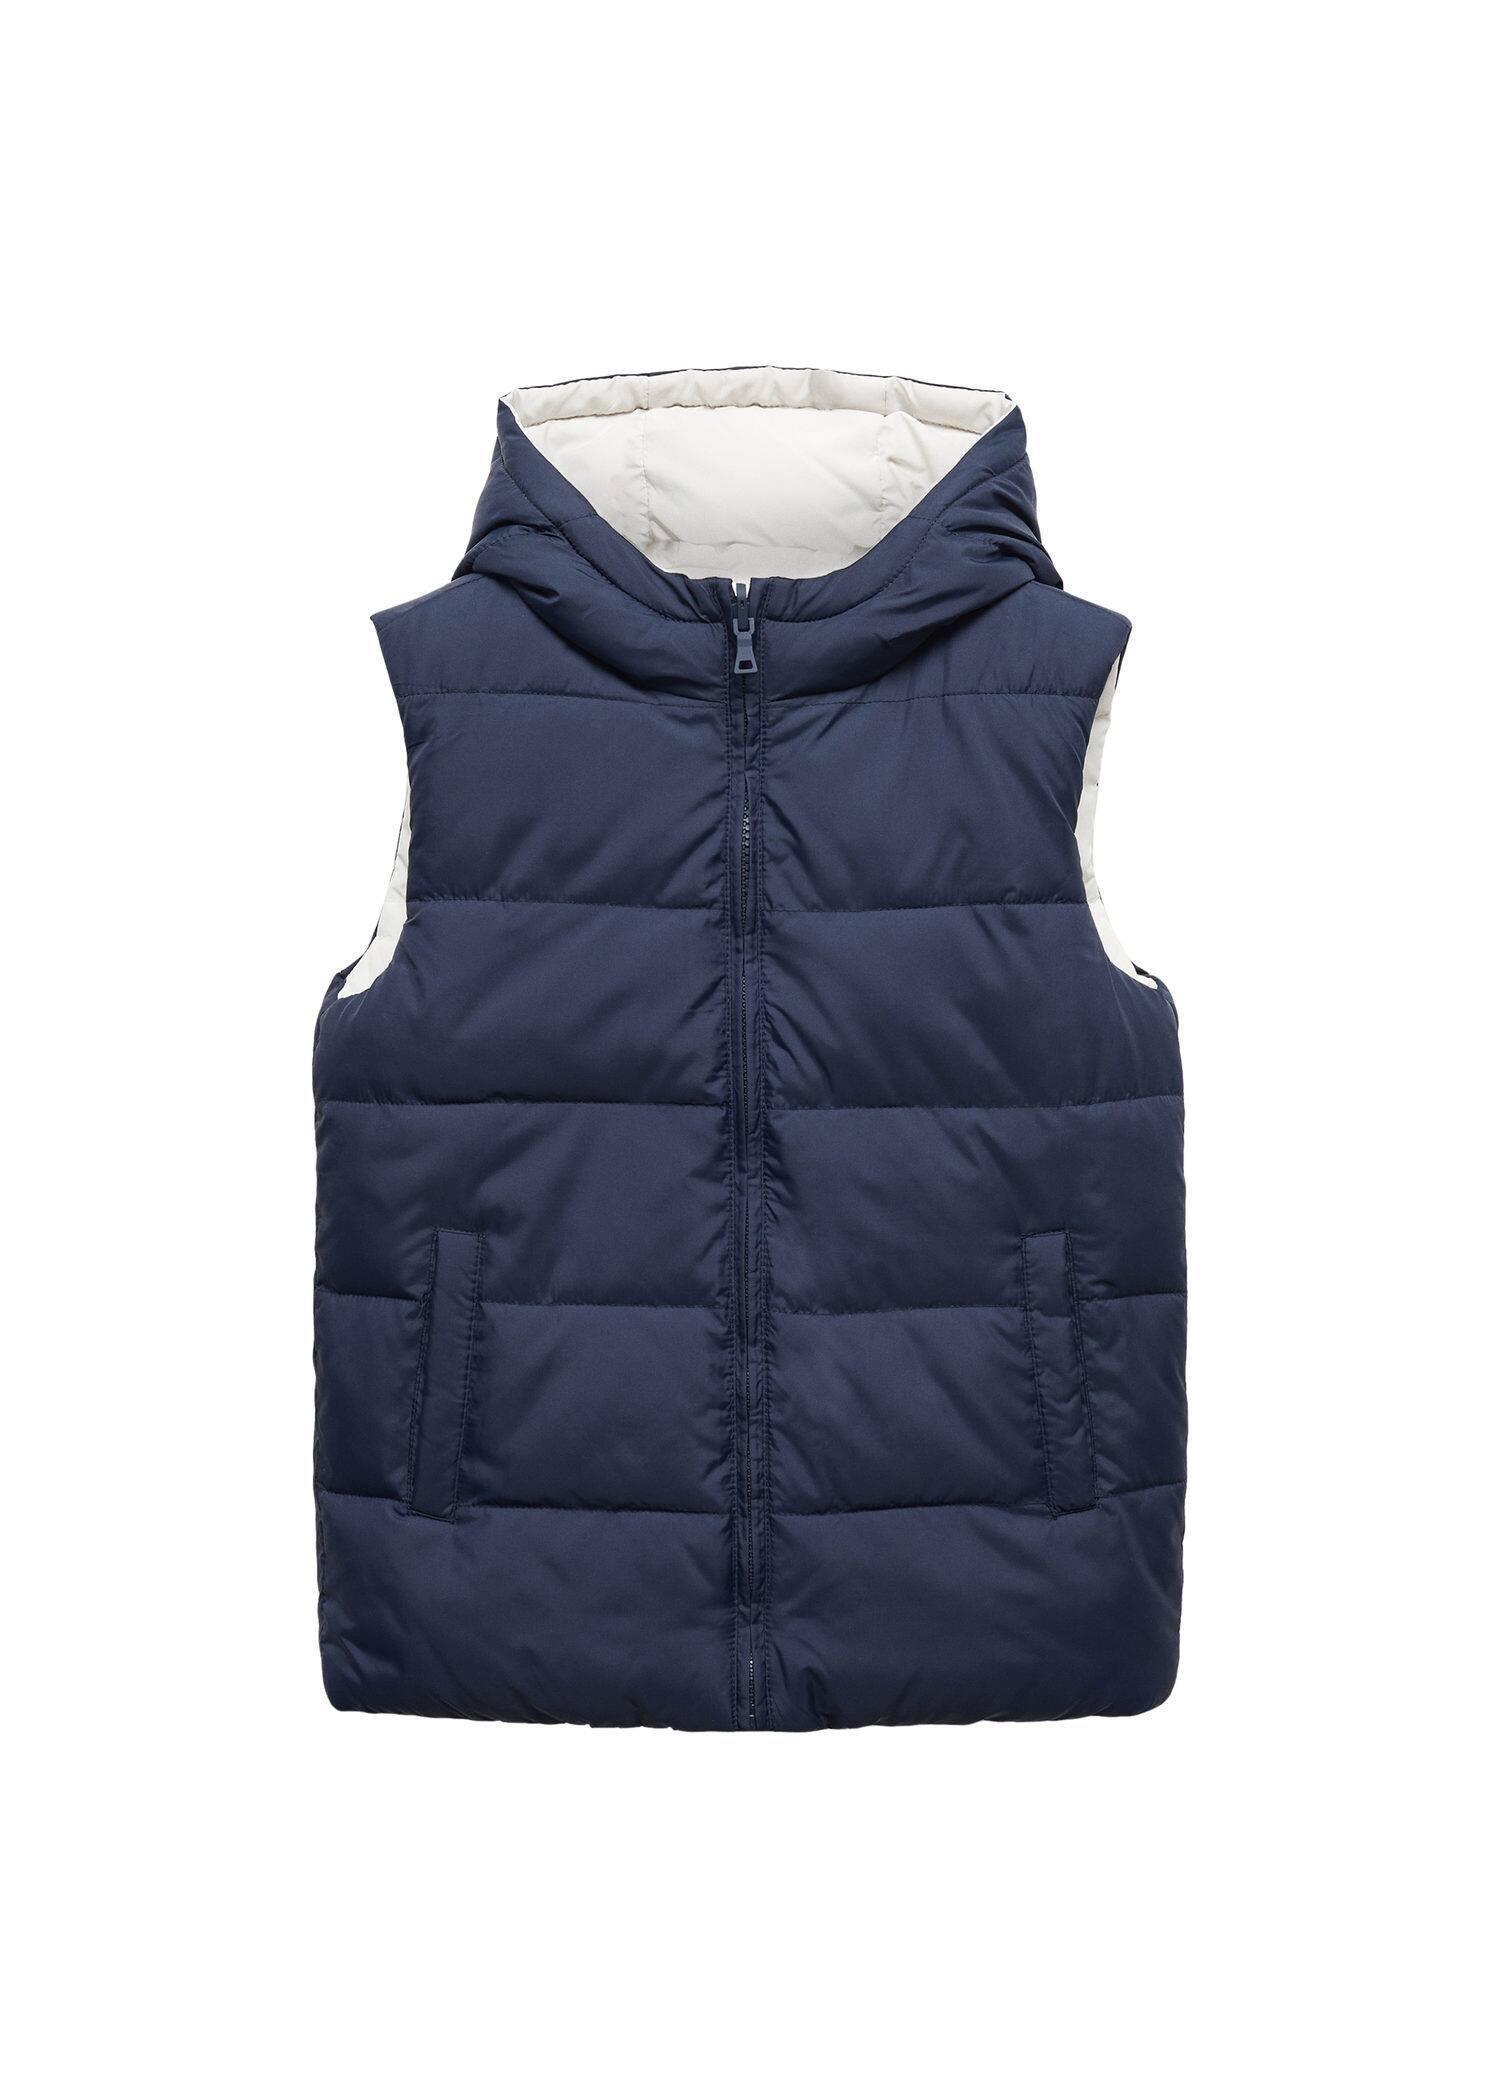 Mango - Navy Reversible Quilted Gilet, Kids Boys